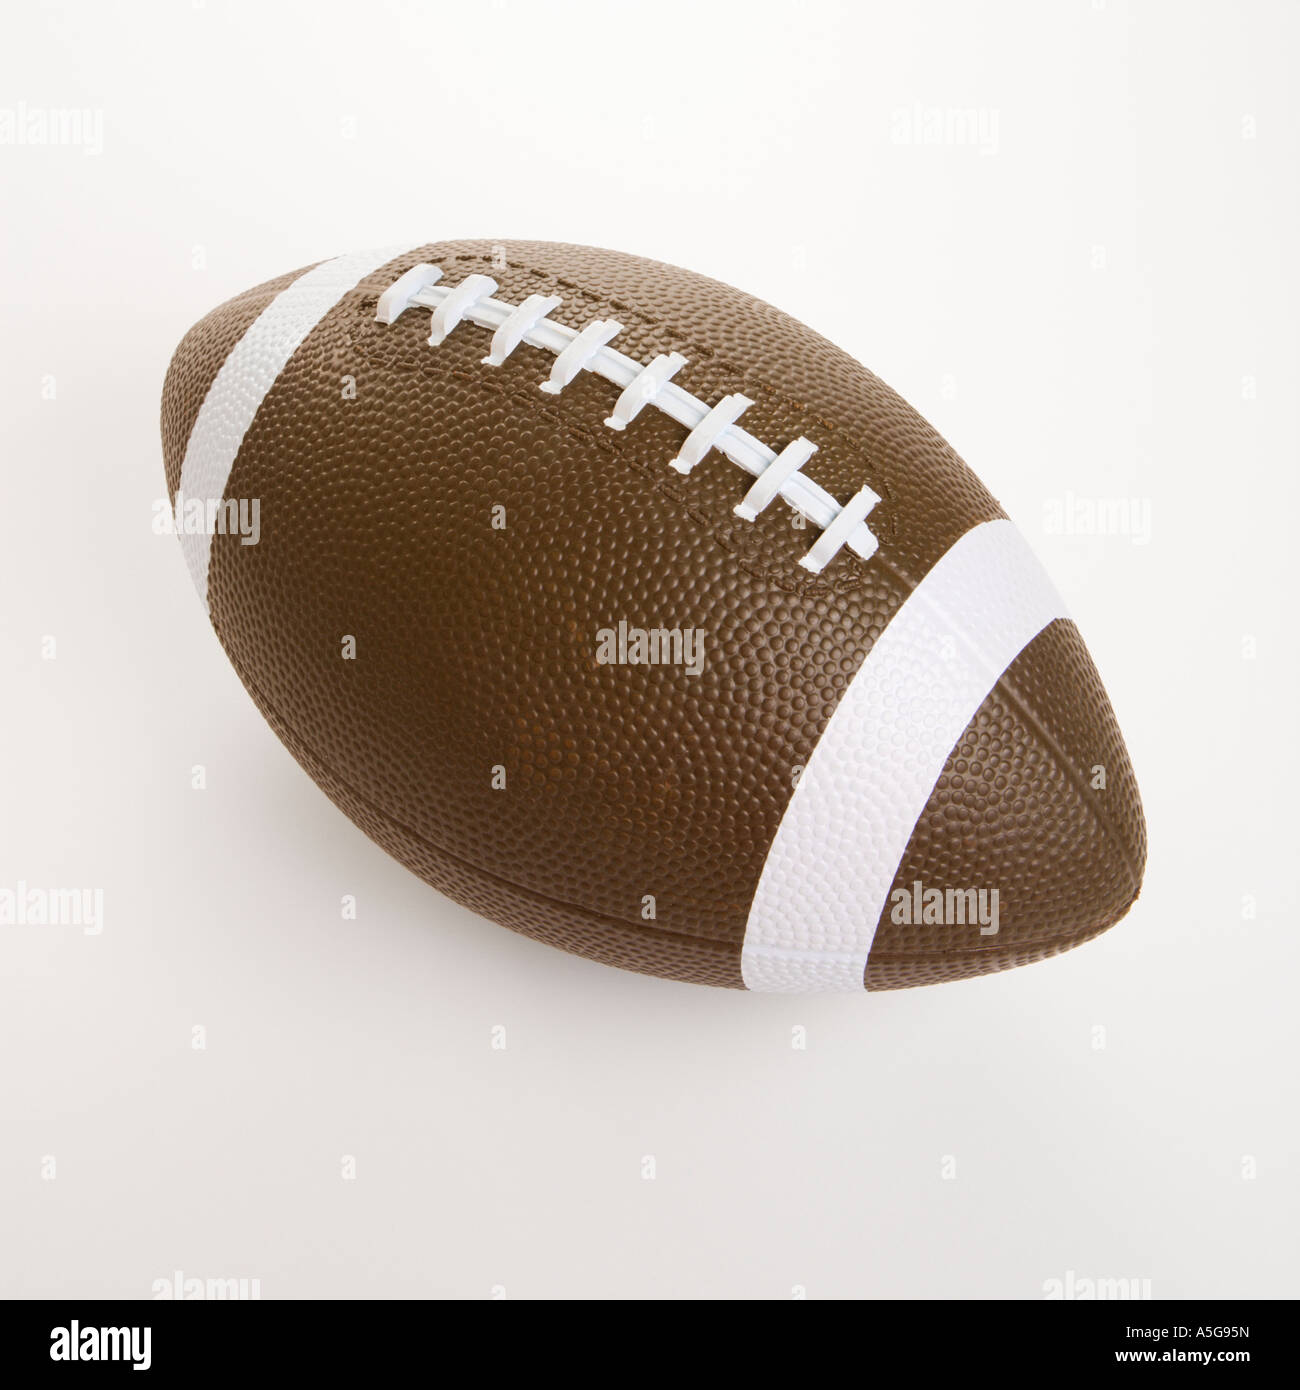 American football on white background Stock Photo